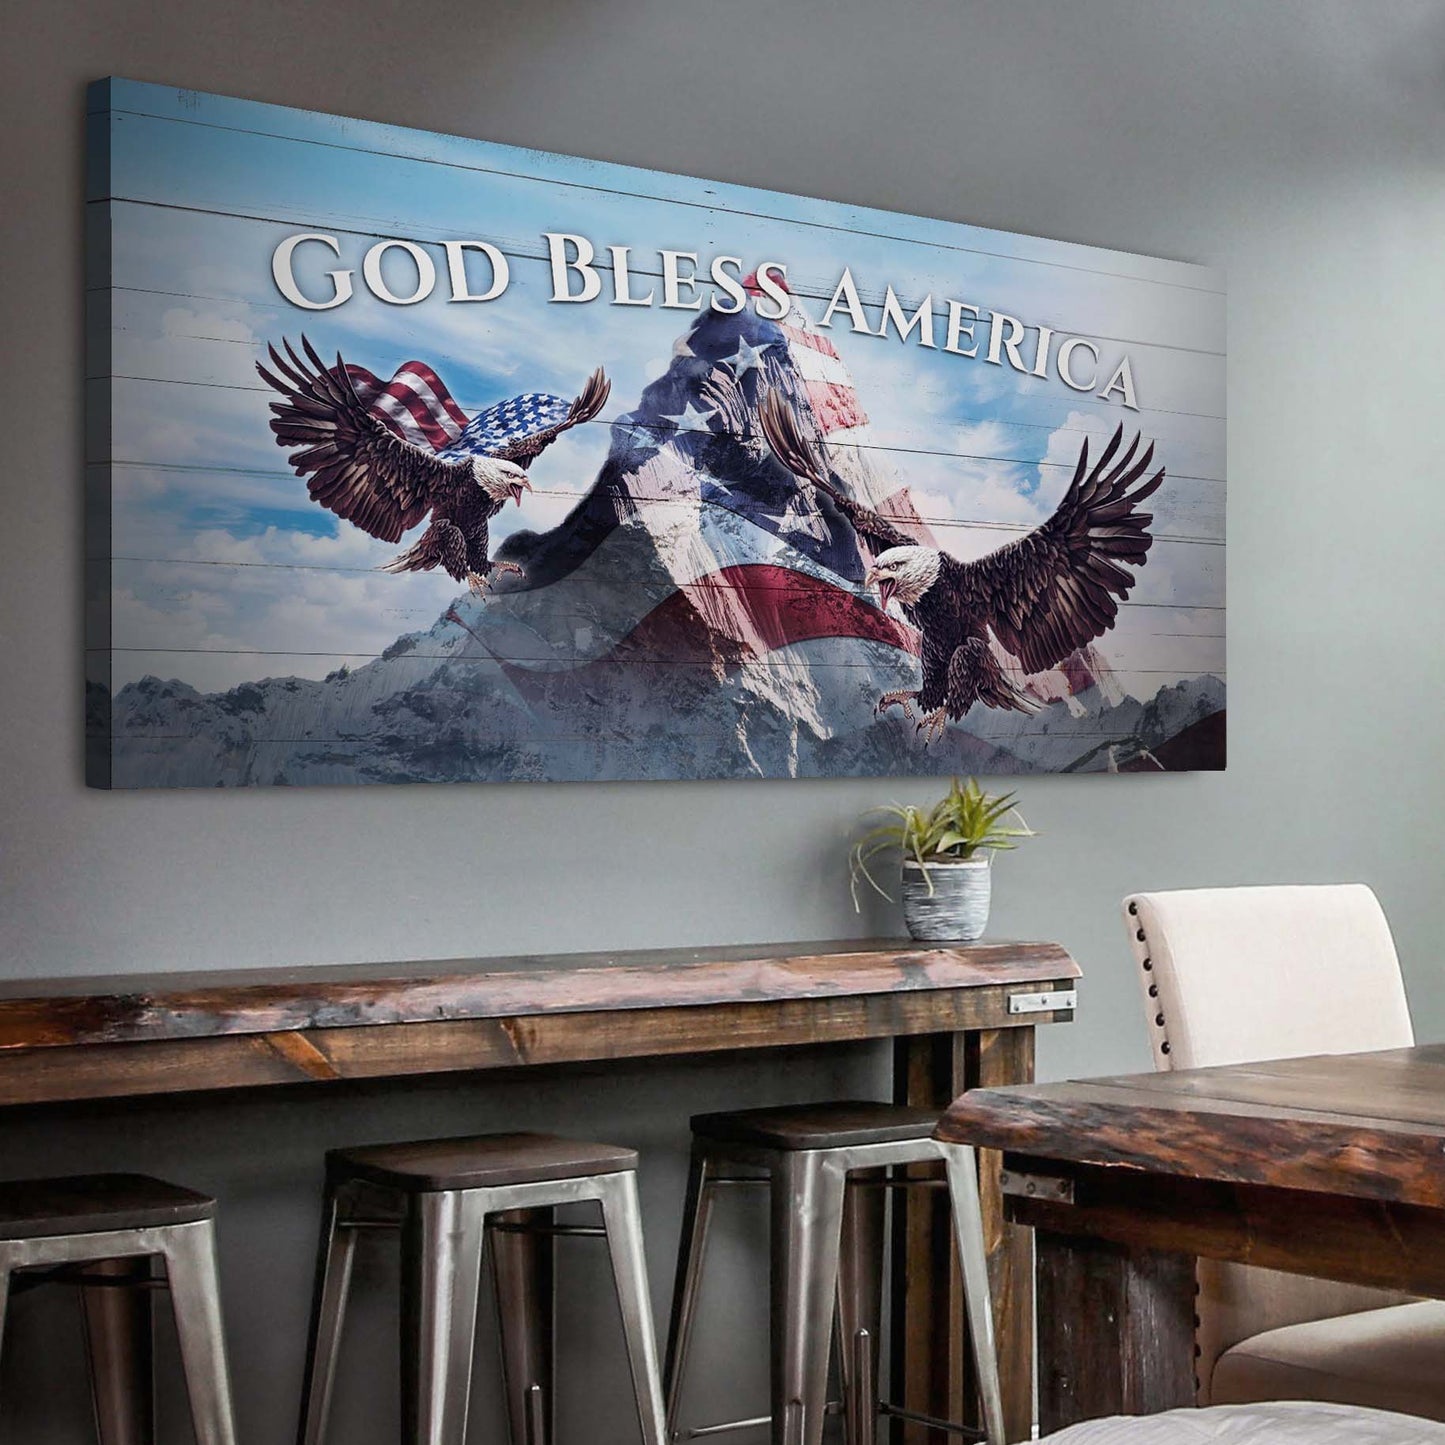 God Bless America Sign - Image by Tailored Canvases